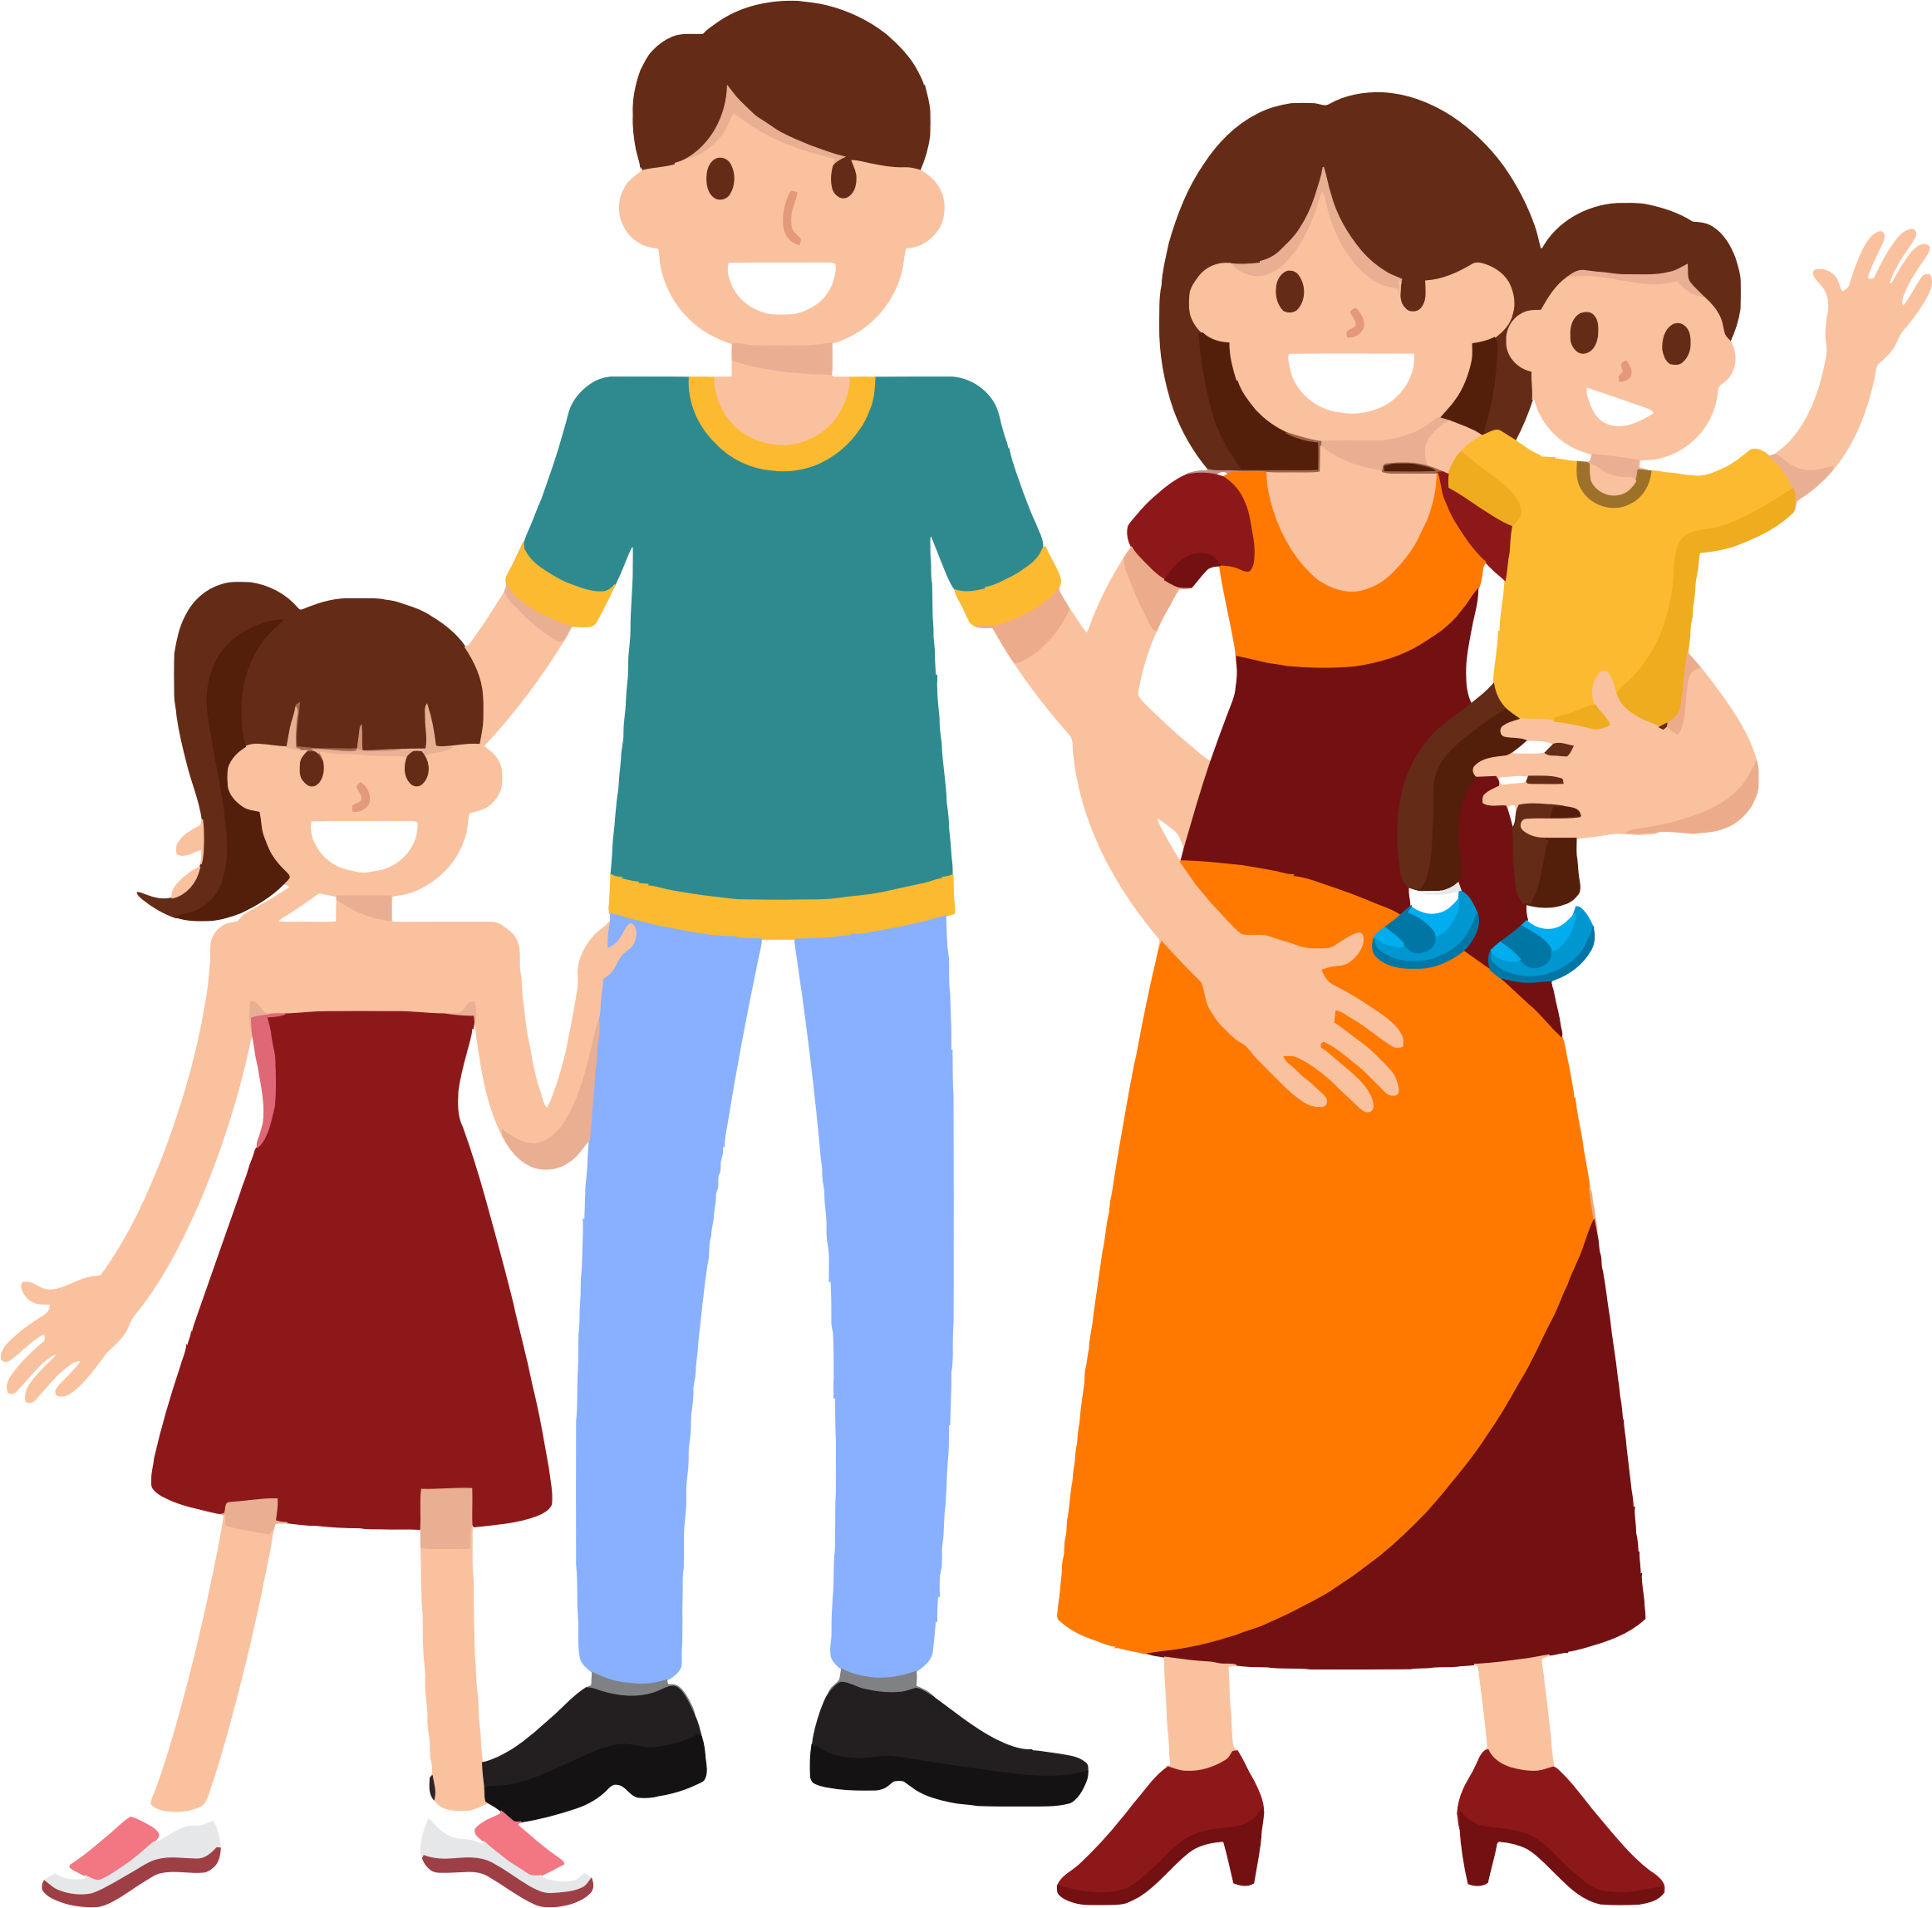 Family Smile Happiness Clip art - Family cartoon png download - 2325*2296 -  Free Transparent png Download. - Clip Art Library